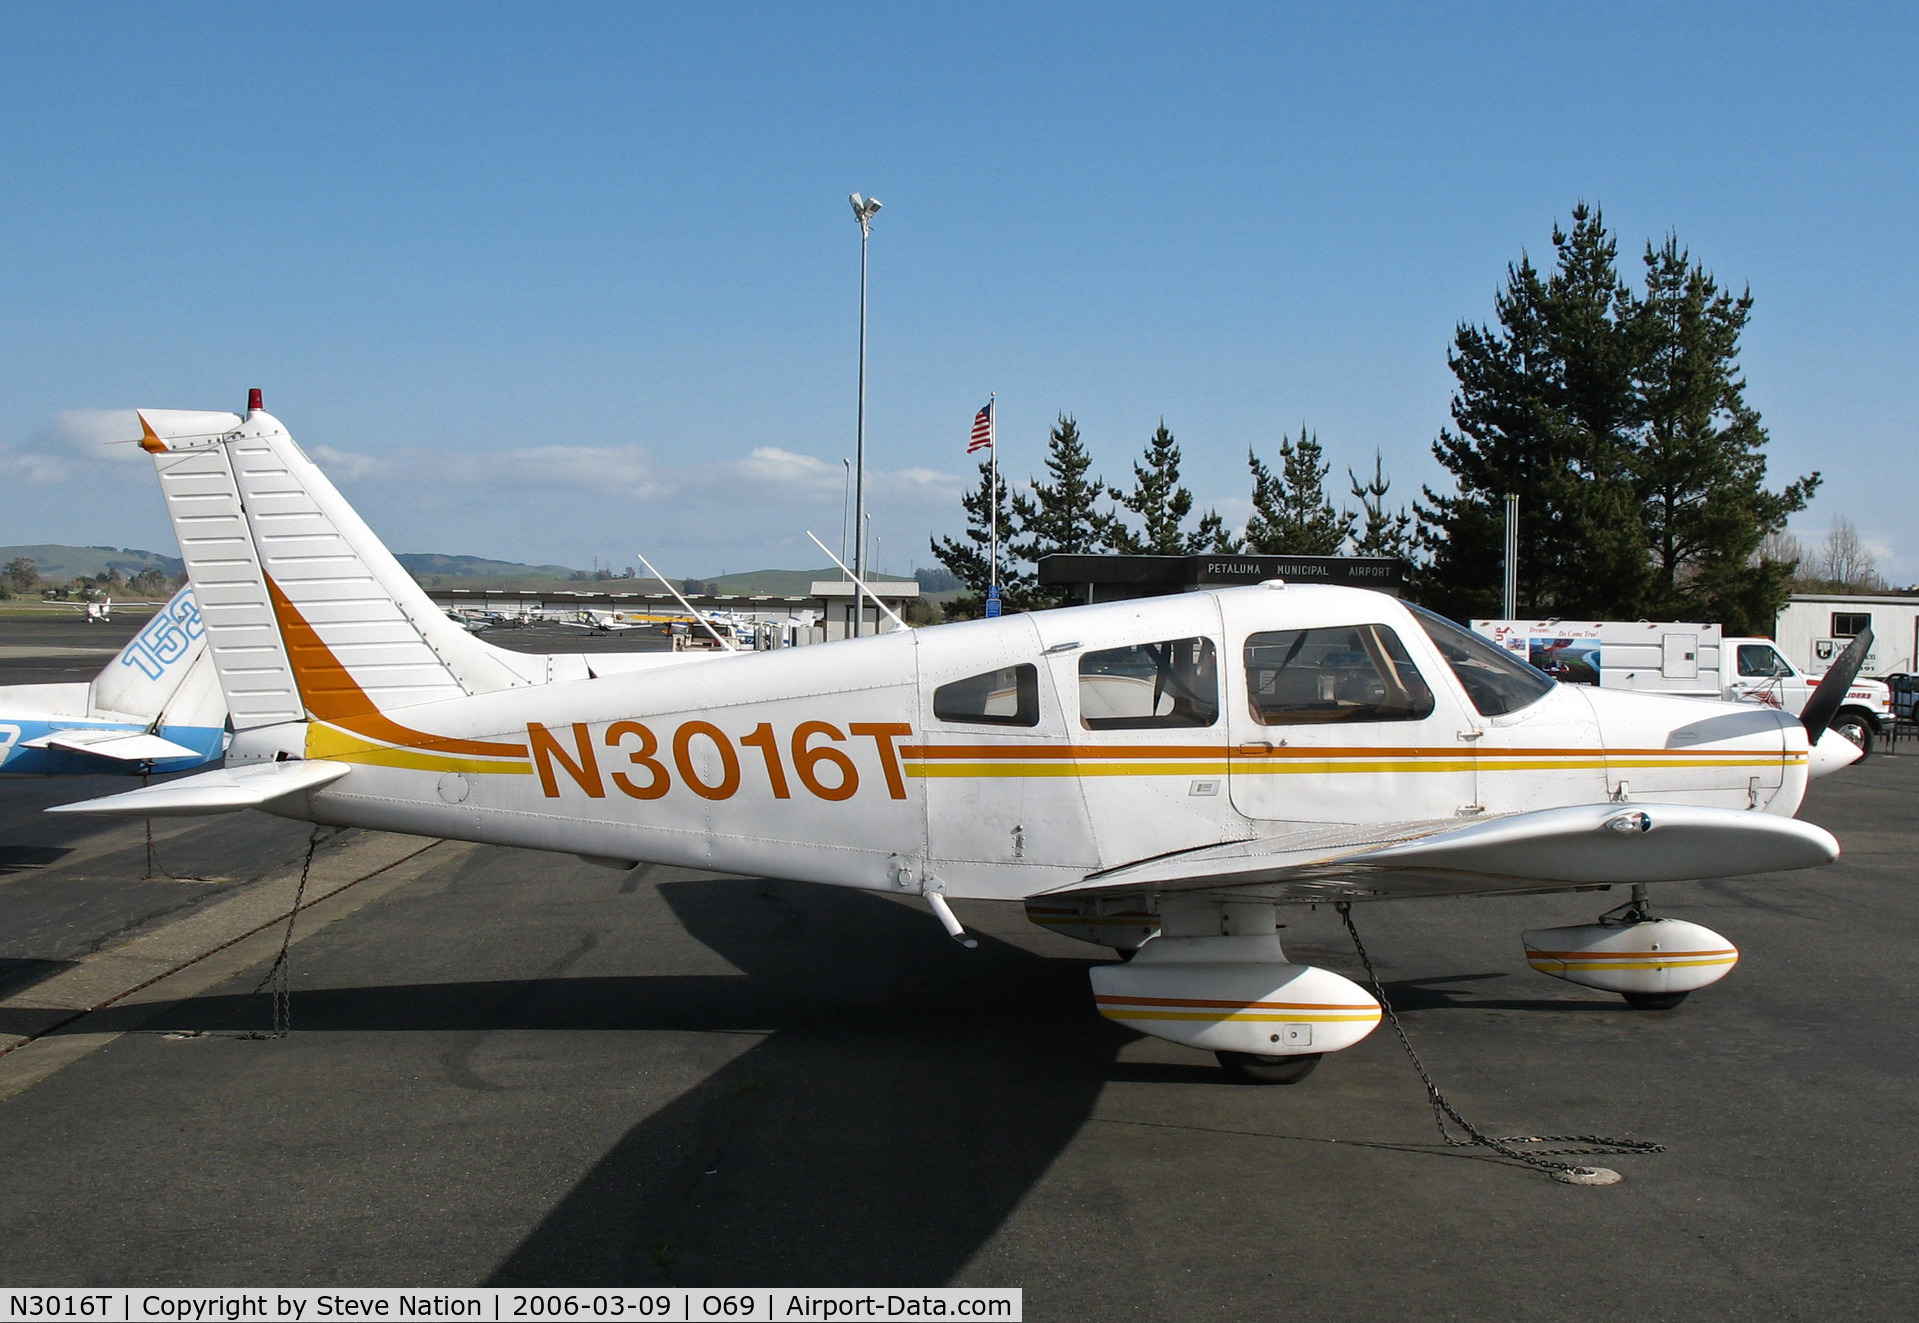 N3016T, 1979 Piper PA-28-161 C/N 28-7916298, Locally-based 1979 Piper PA-28-161 @ Petaluma, CA (with owner in Santa Maria, CA by Oct 2010)